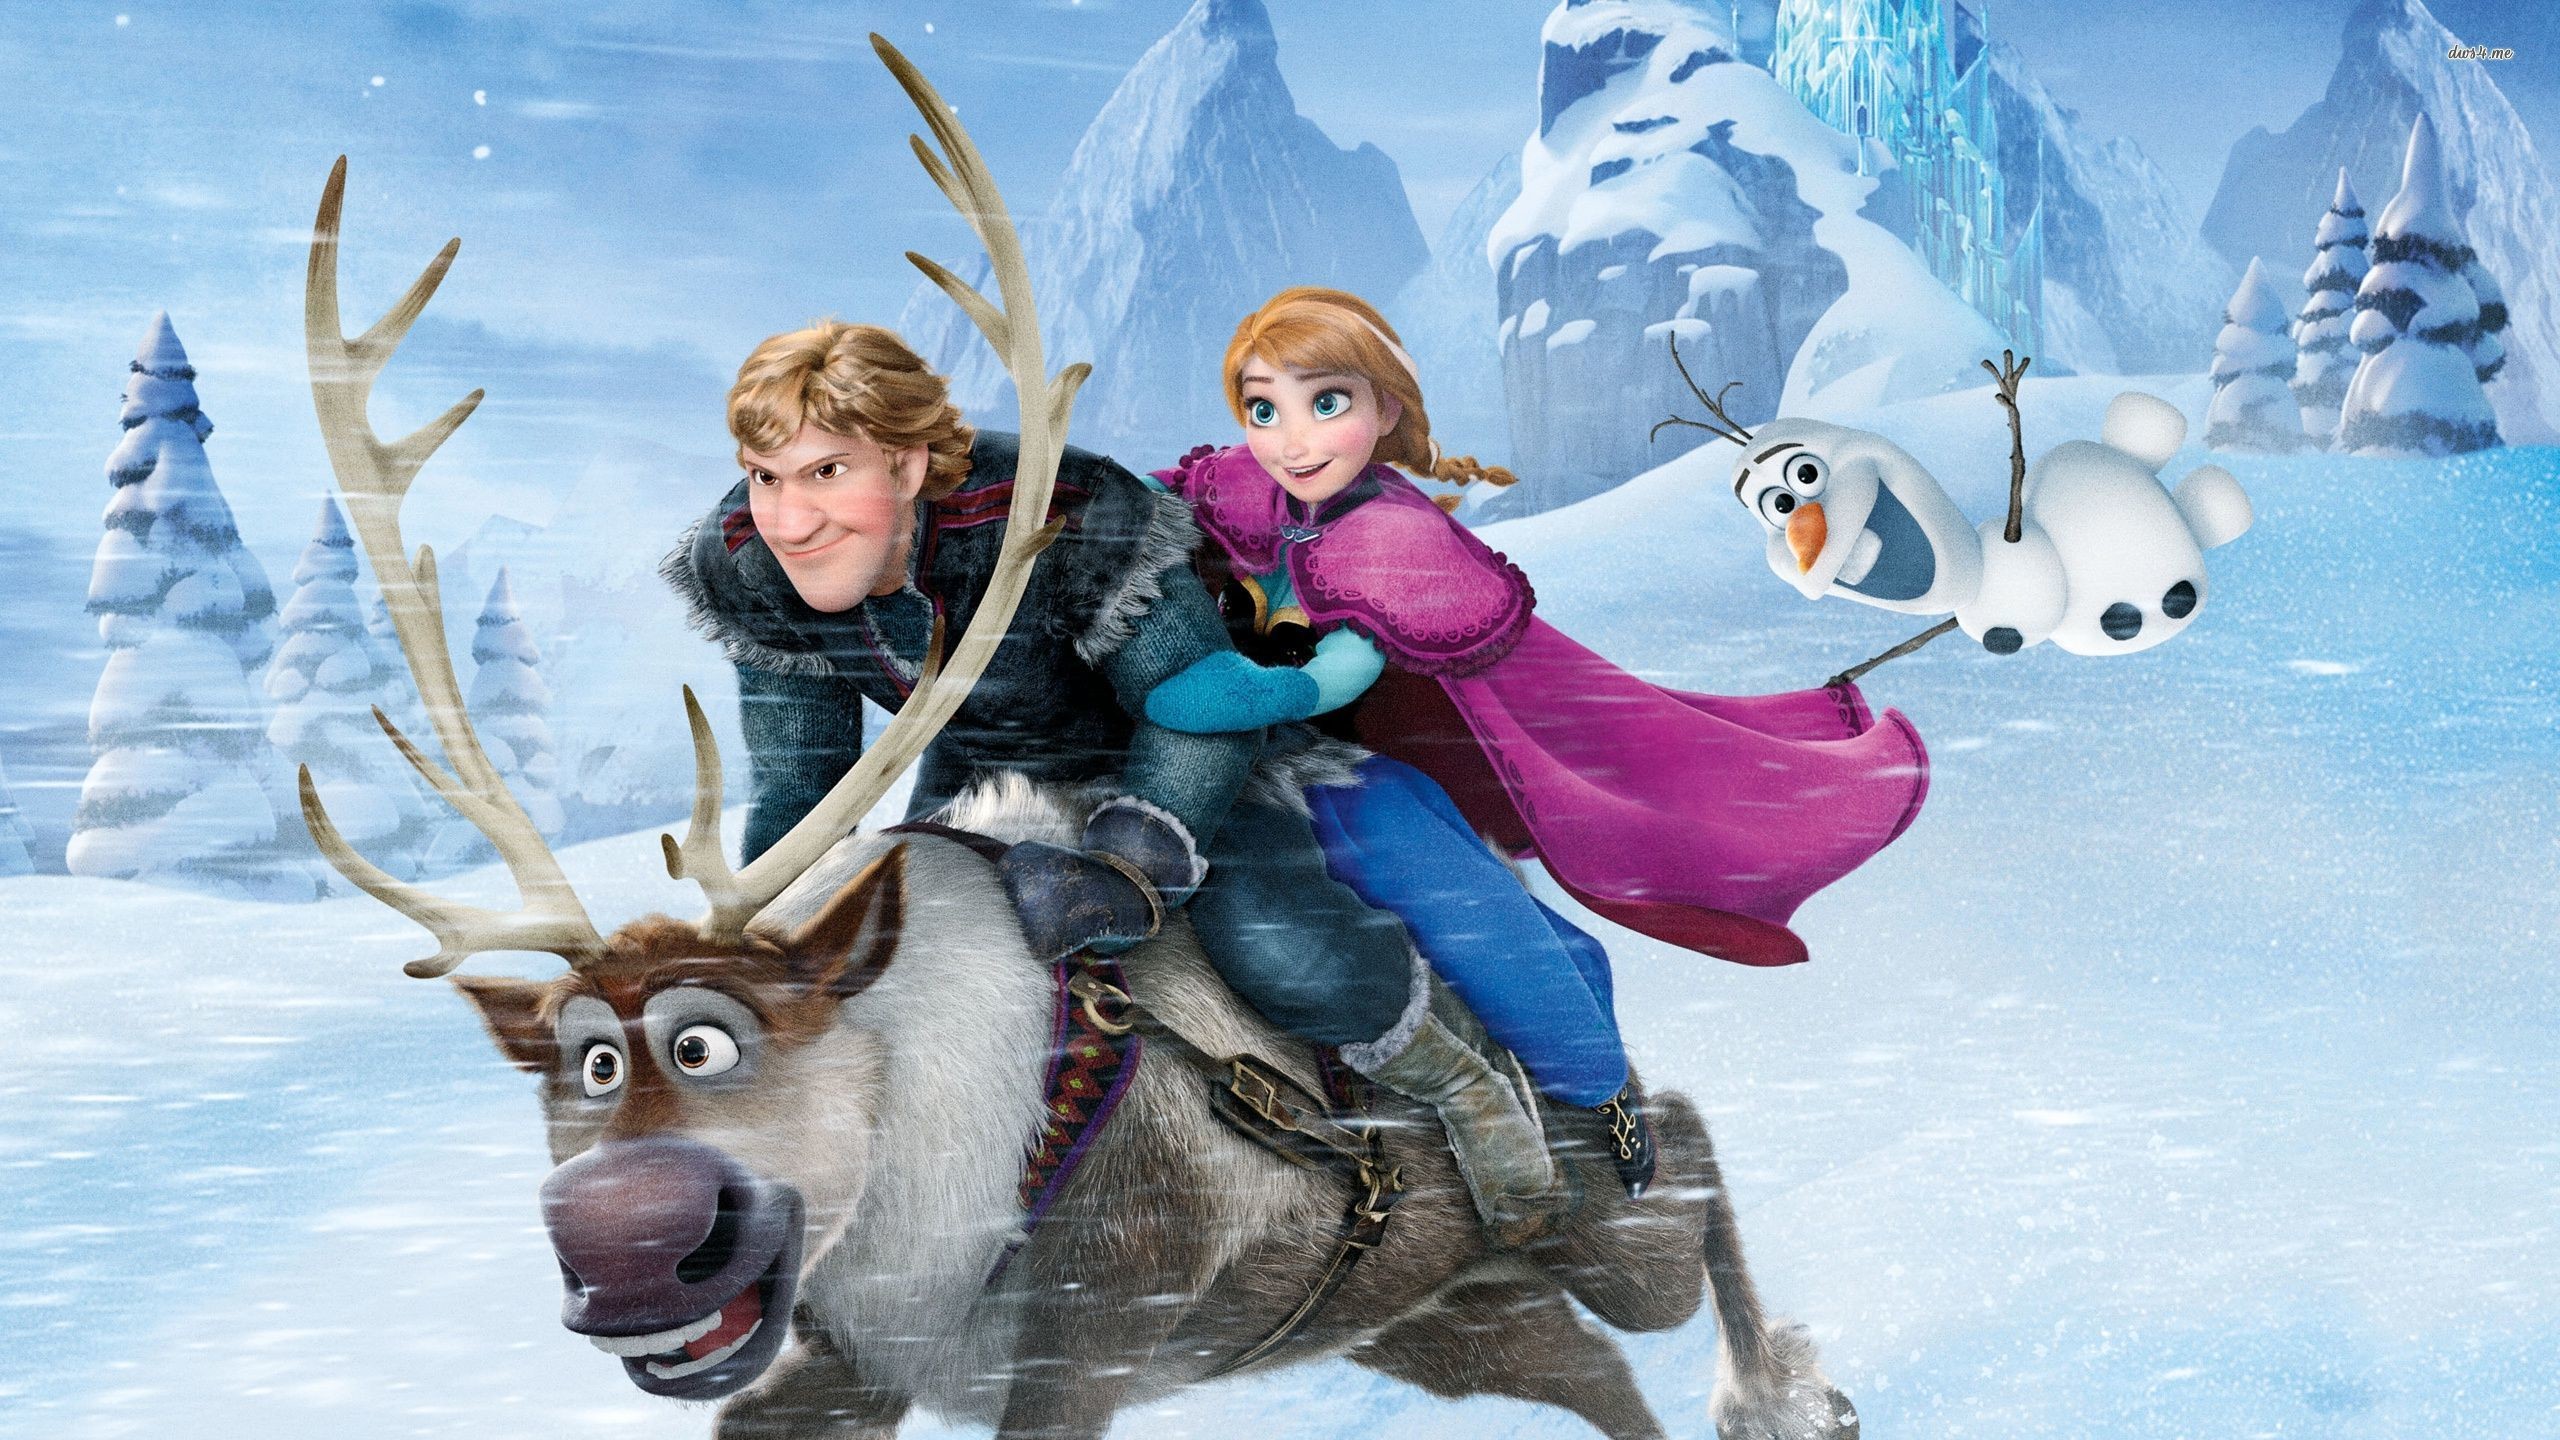 2560x1440 ... Anna, Olaf and Kristoff in the snow - Frozen wallpaper  ...